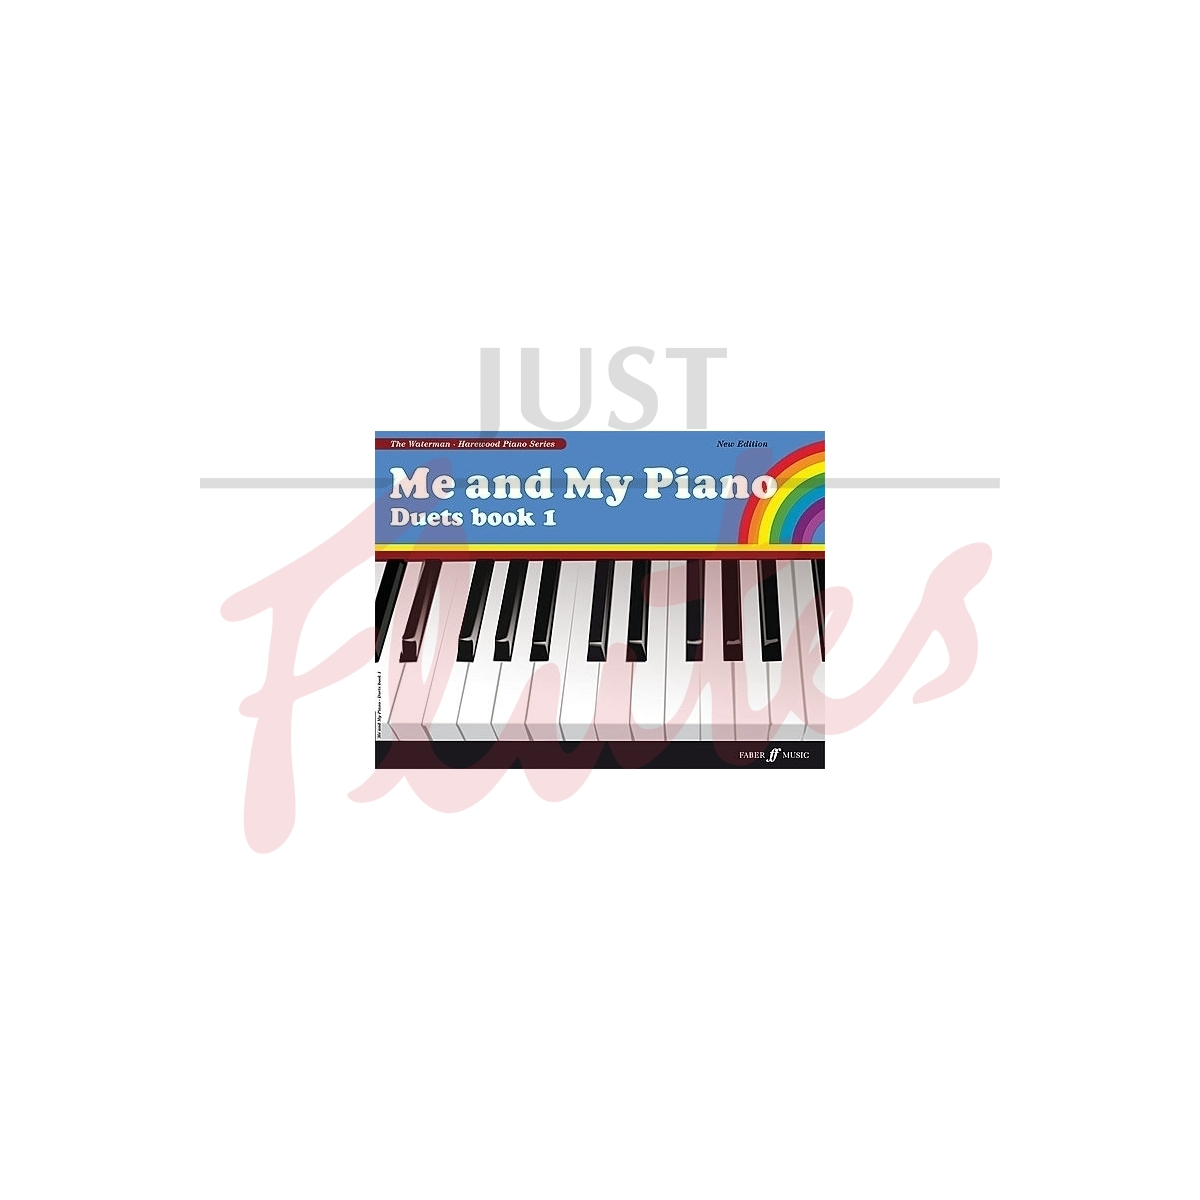 Me and My Piano: Duets Book 1